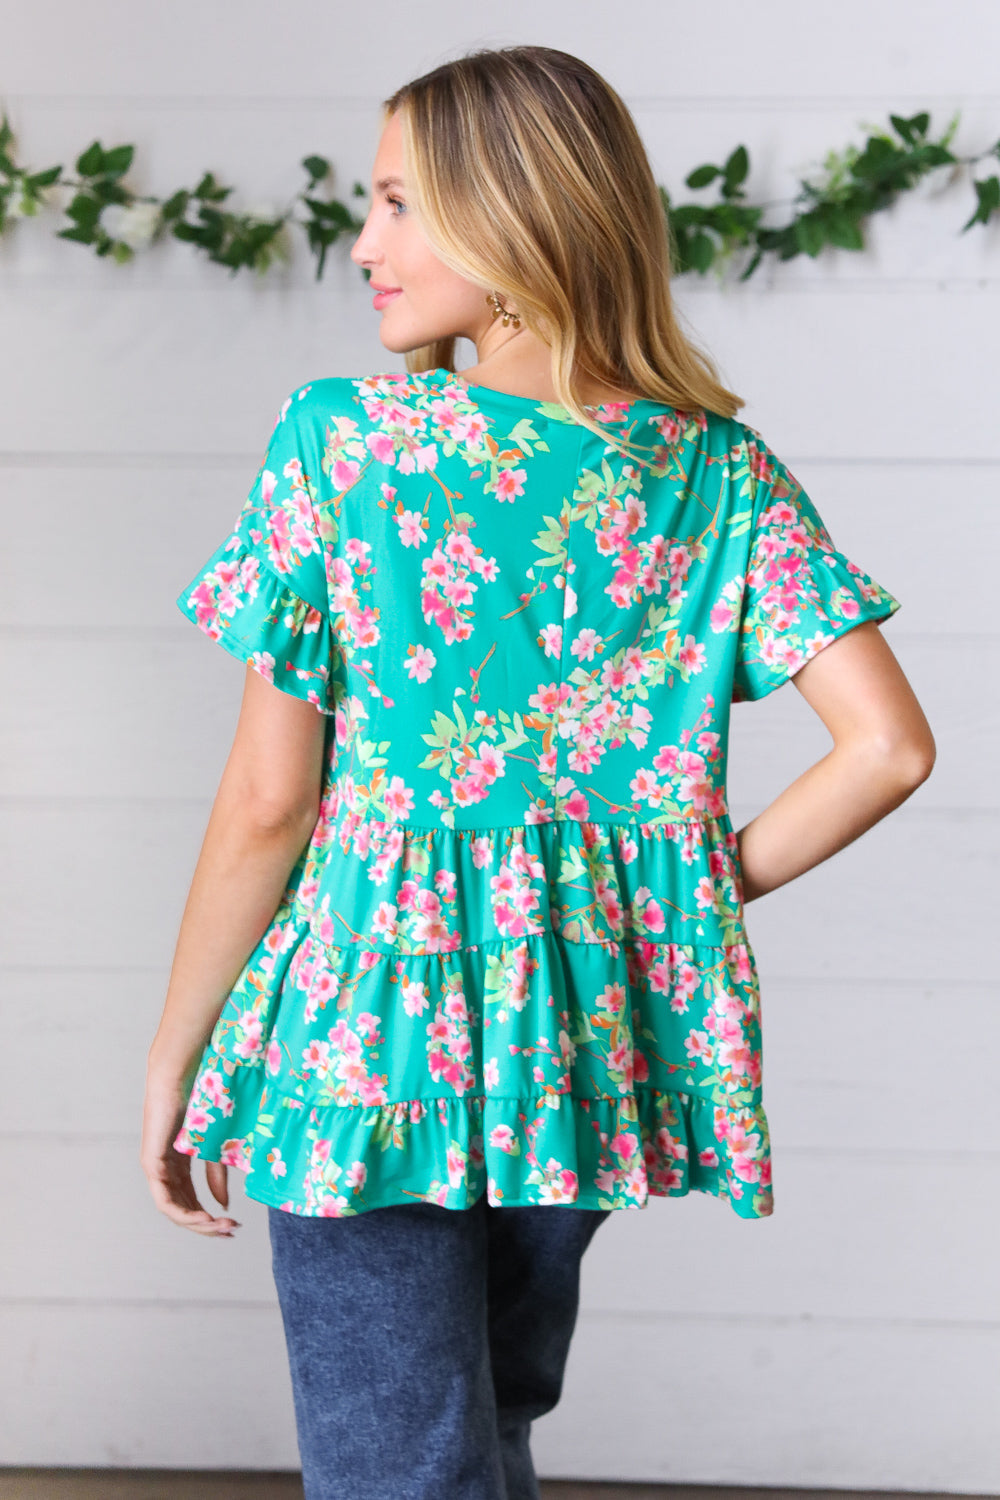 Teal Floral Frill Ruffle Hem Tiered Swing Top